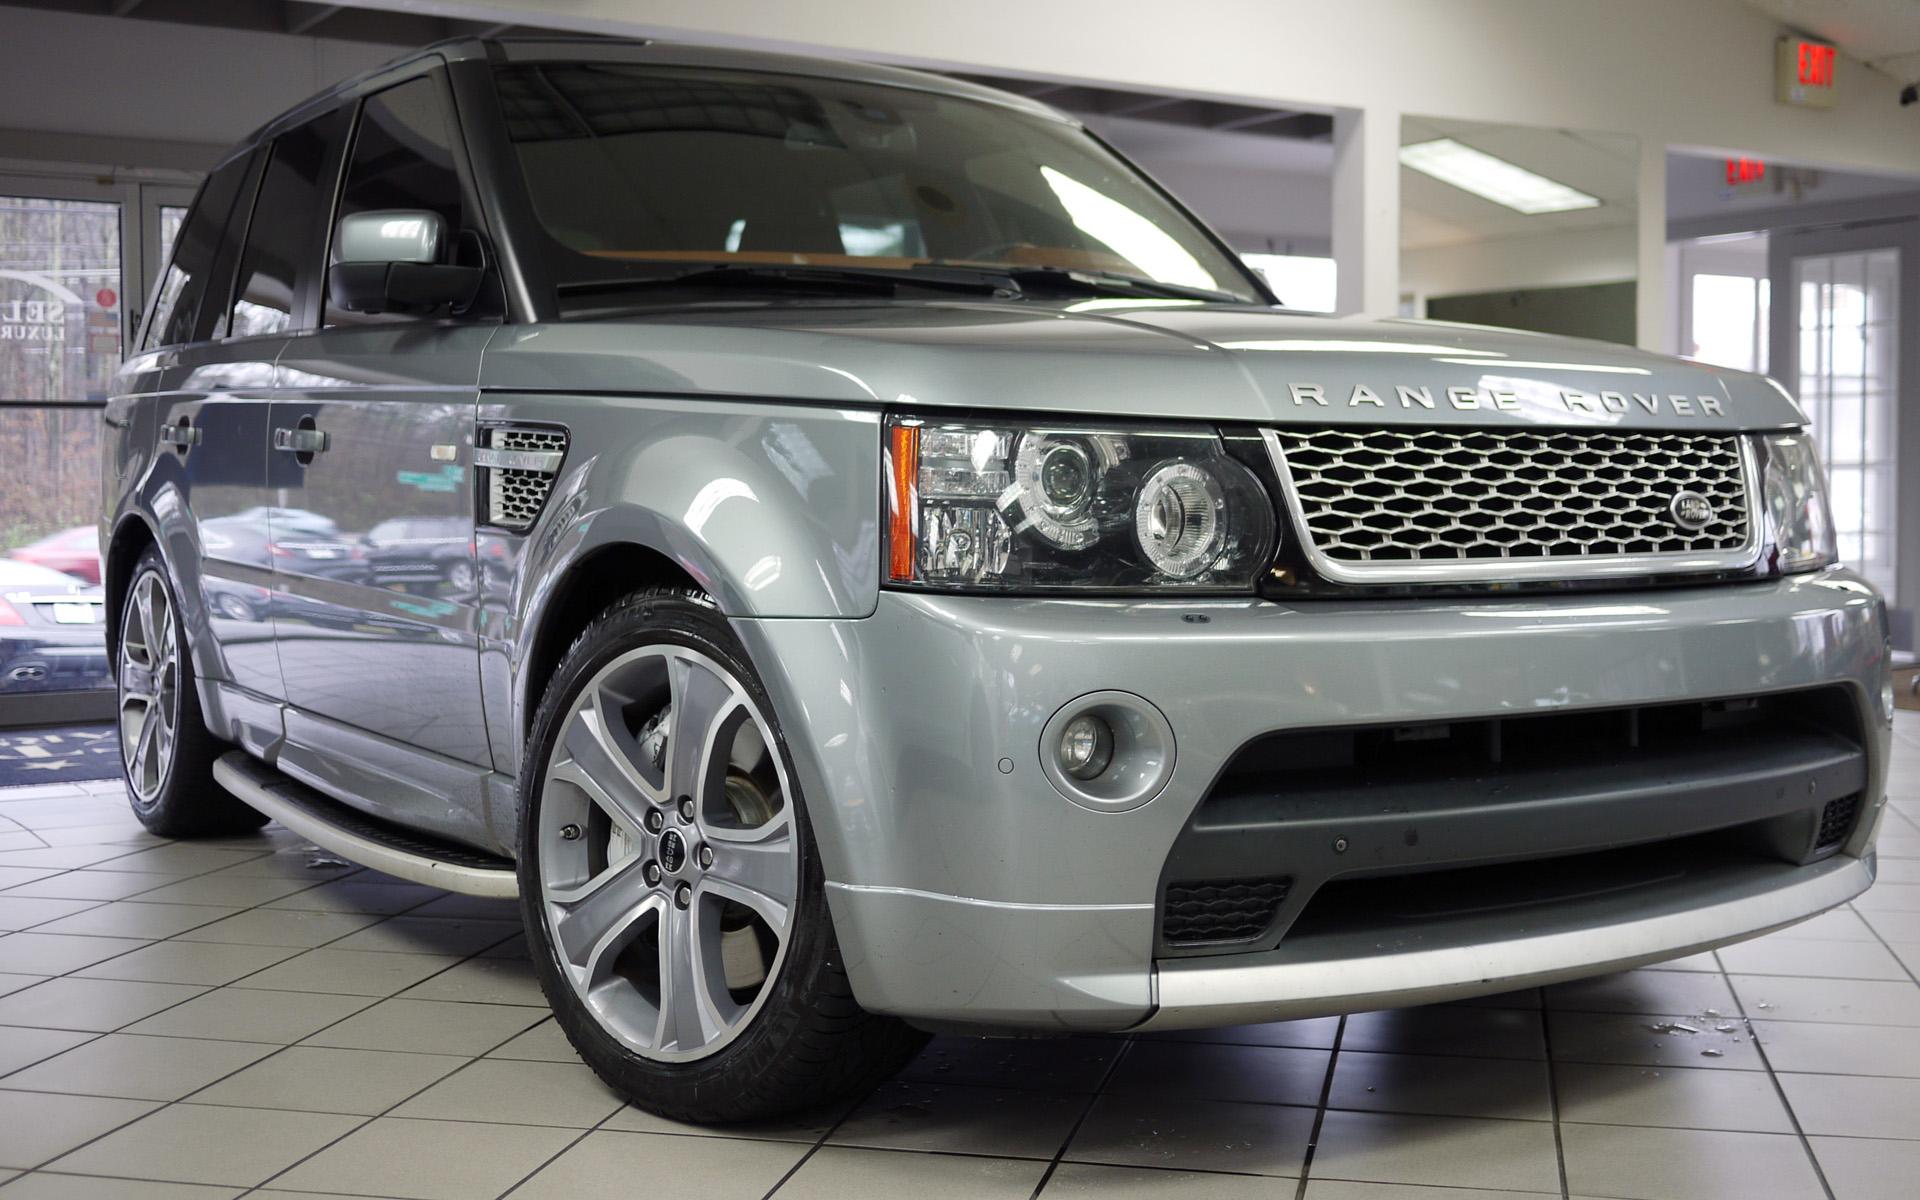 Rover sport 2010. Range Rover Supercharged 2012. Range Rover Sport Supercharged 2012. Ленд Ровер Рендж Ровер 2012. Рендж Ровер спорт l320.